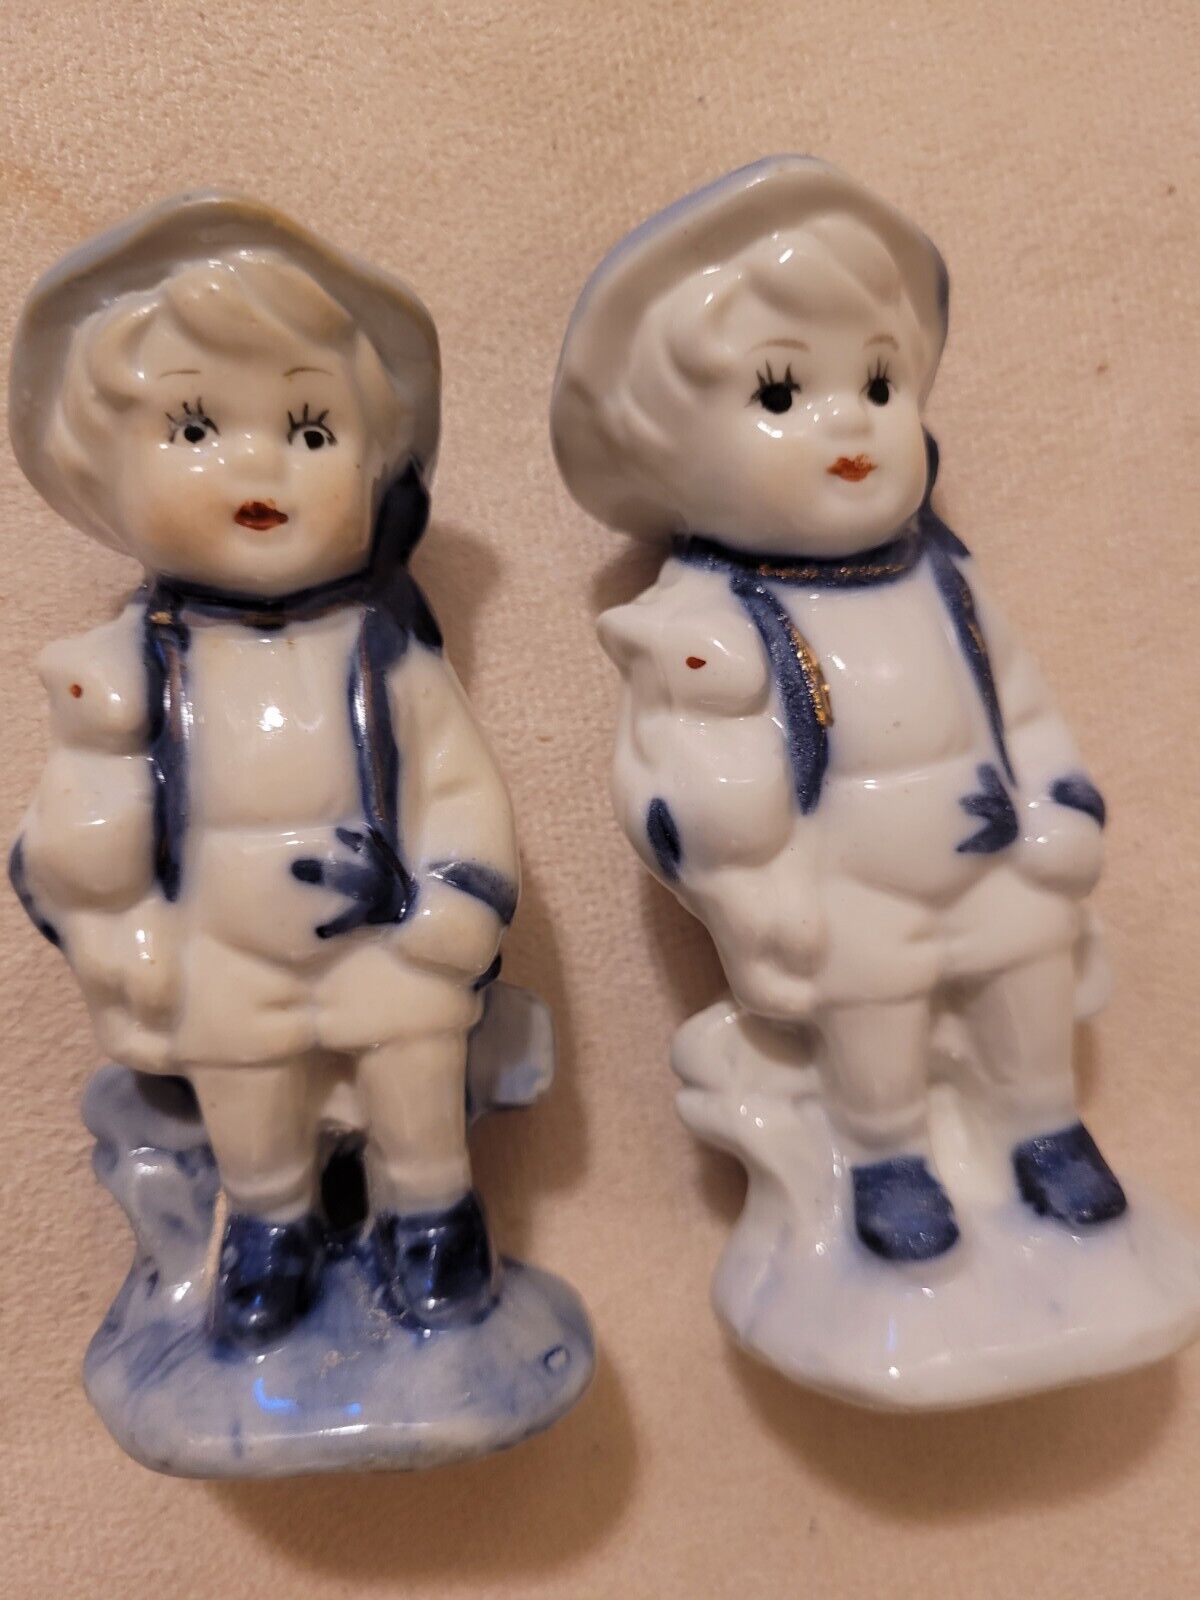 Pack with 2 Vintage Boy  Porcelain Ceramic  Figurines with bunny Rabbits.